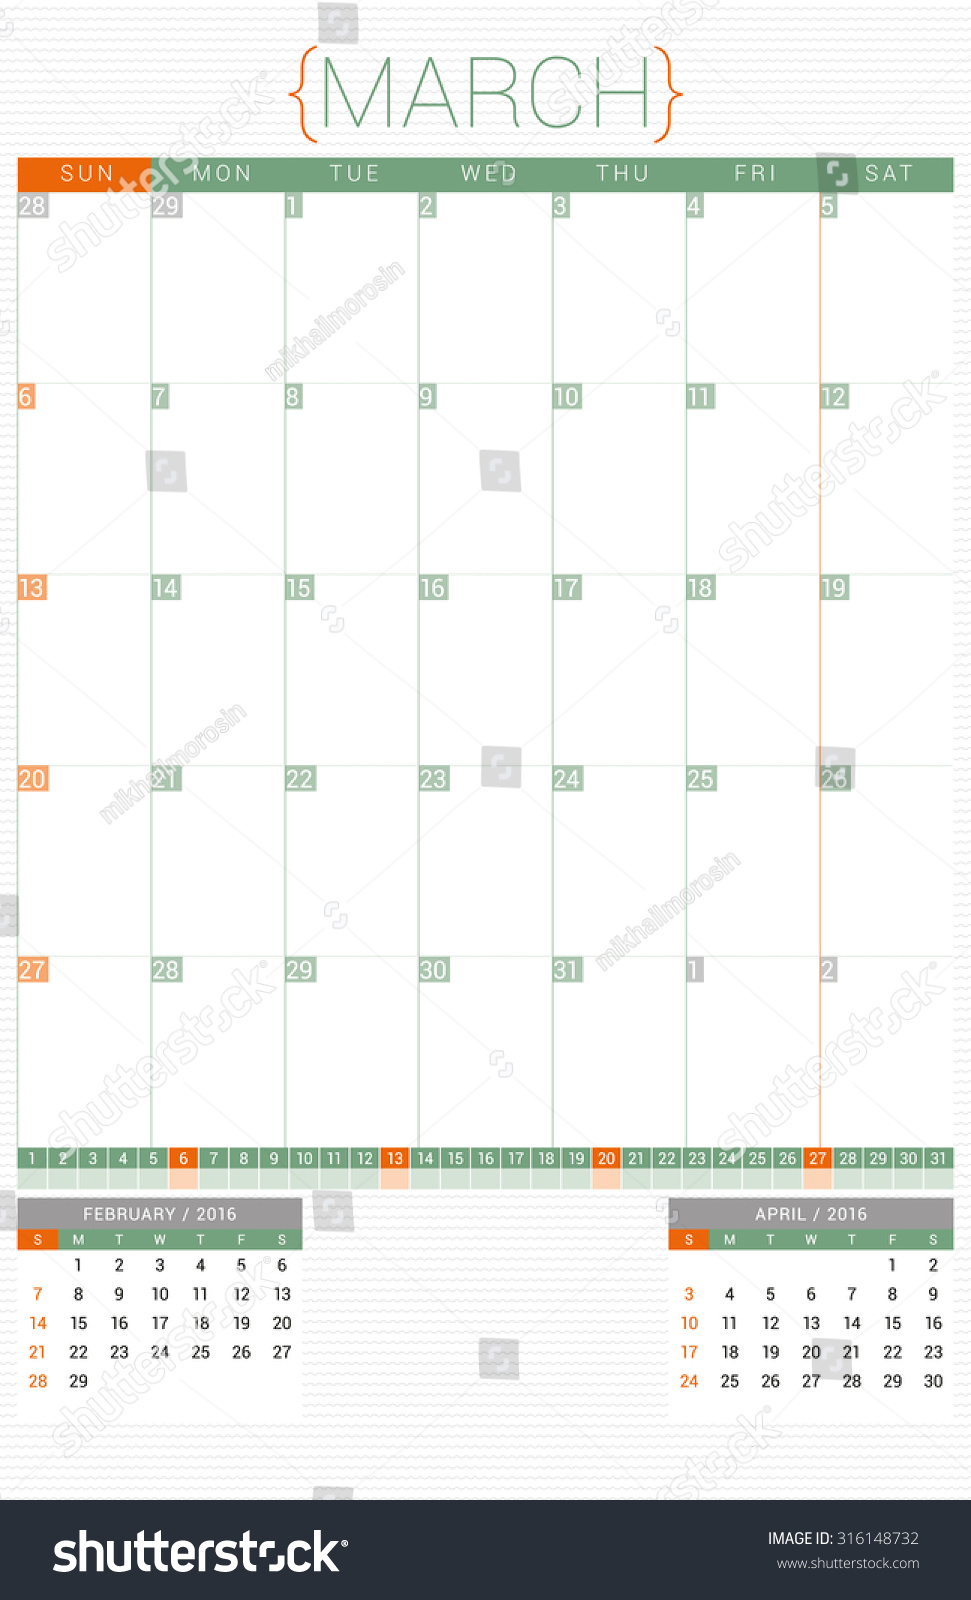 Planner 2016 Template from image.shutterstock.com